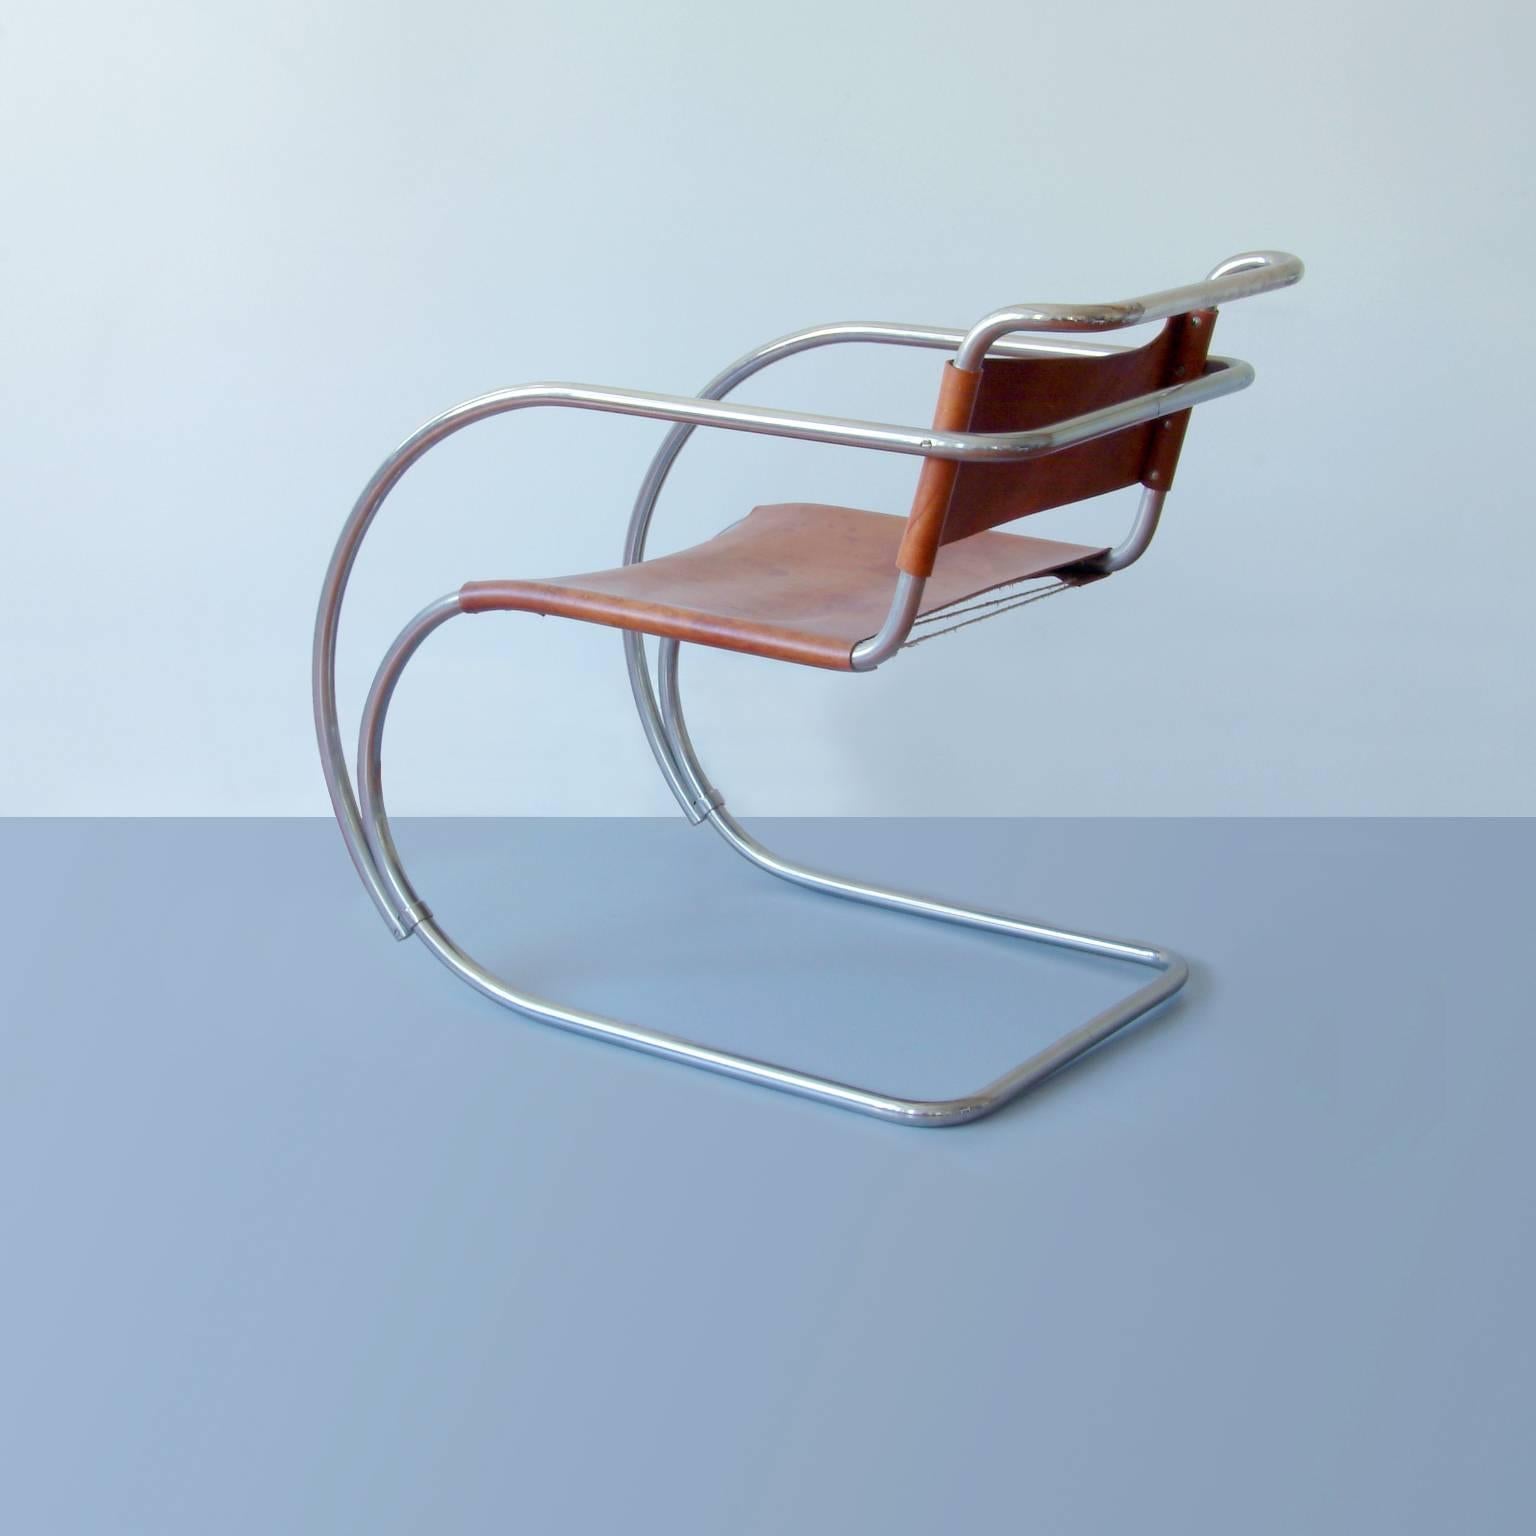 Rare tubular steel cantilever chair MR 20 (so-called Weißenhof- Sessel) by Ludwig Mies van der Rohe, produced by Berliner Metallgewerbe Joseph Müller, 1927.